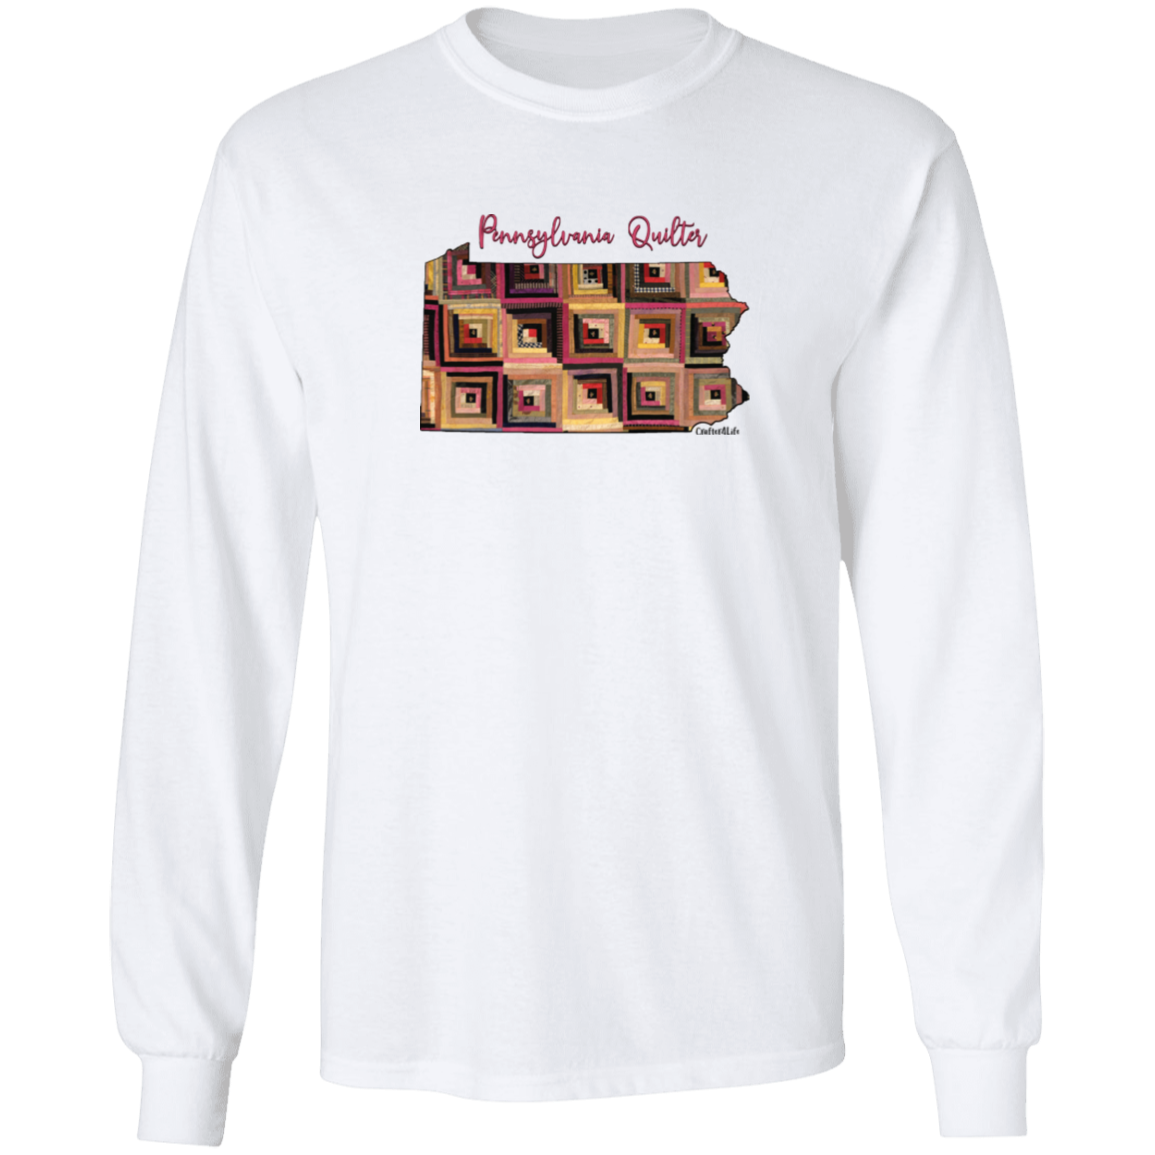 Pennsylvania Quilter Long Sleeve T-Shirt, Gift for Quilting Friends and Family